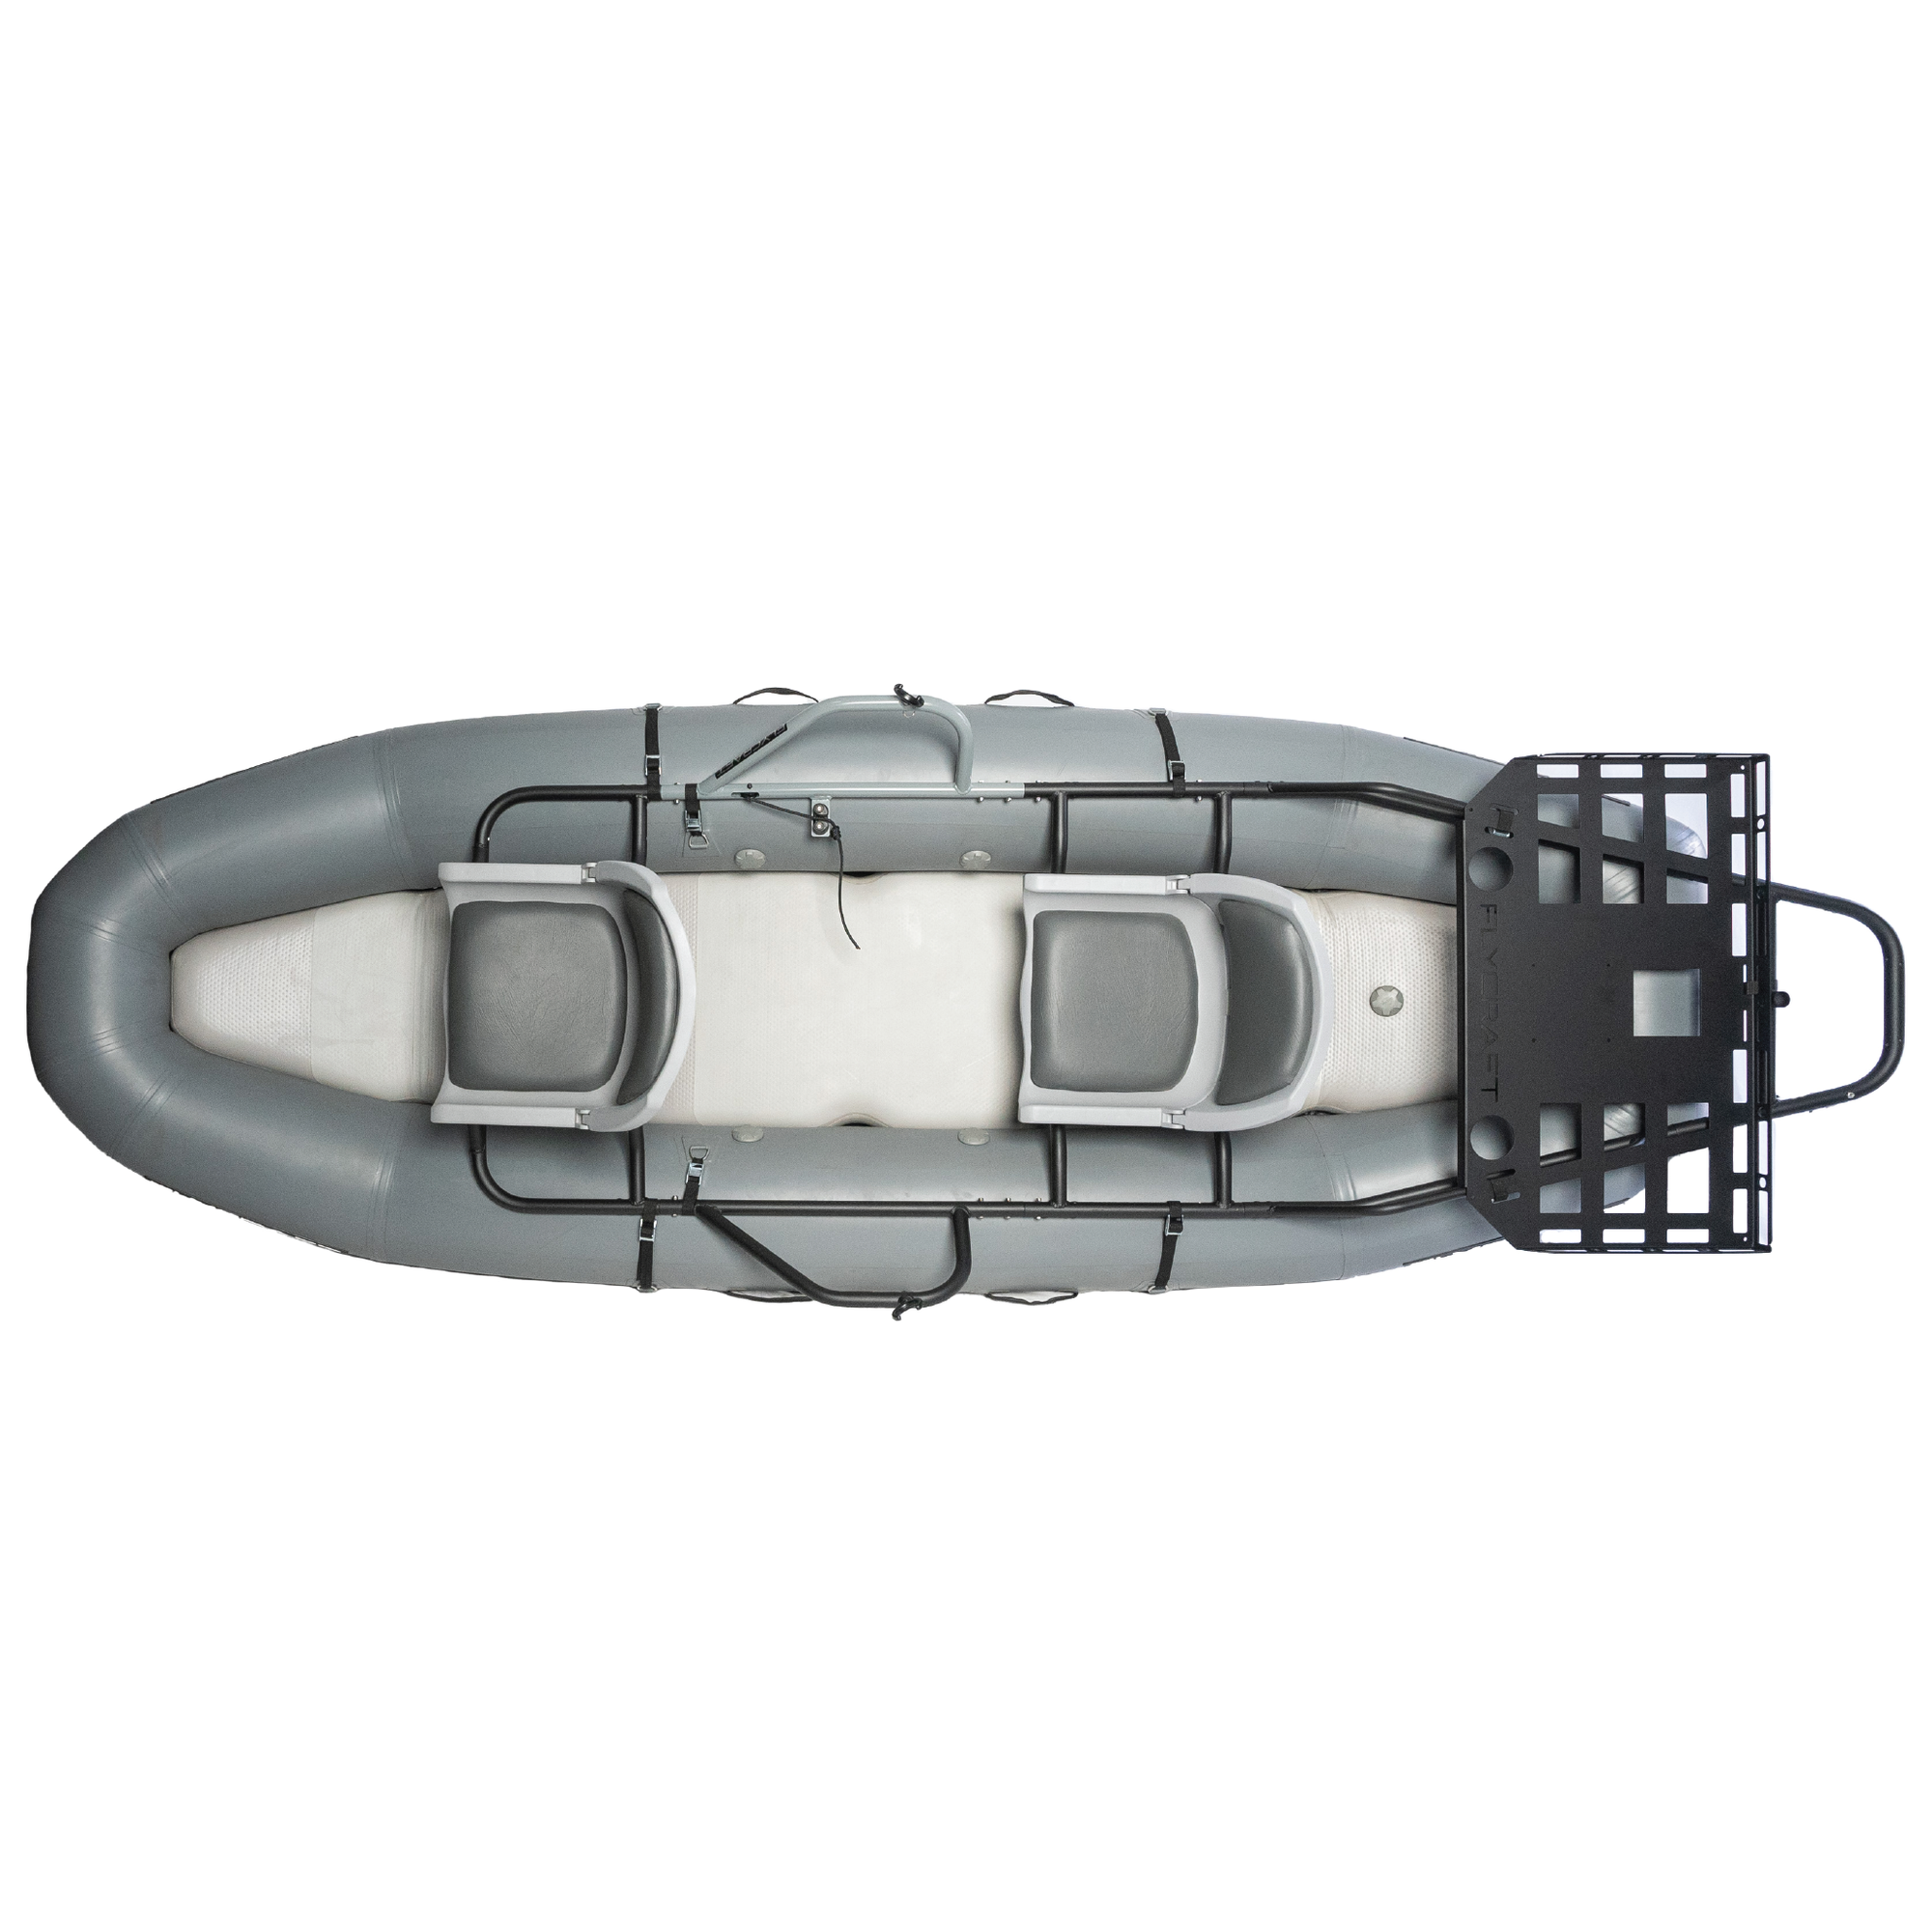 Inflatable fishing pontoon boats are just ideal for fishing and